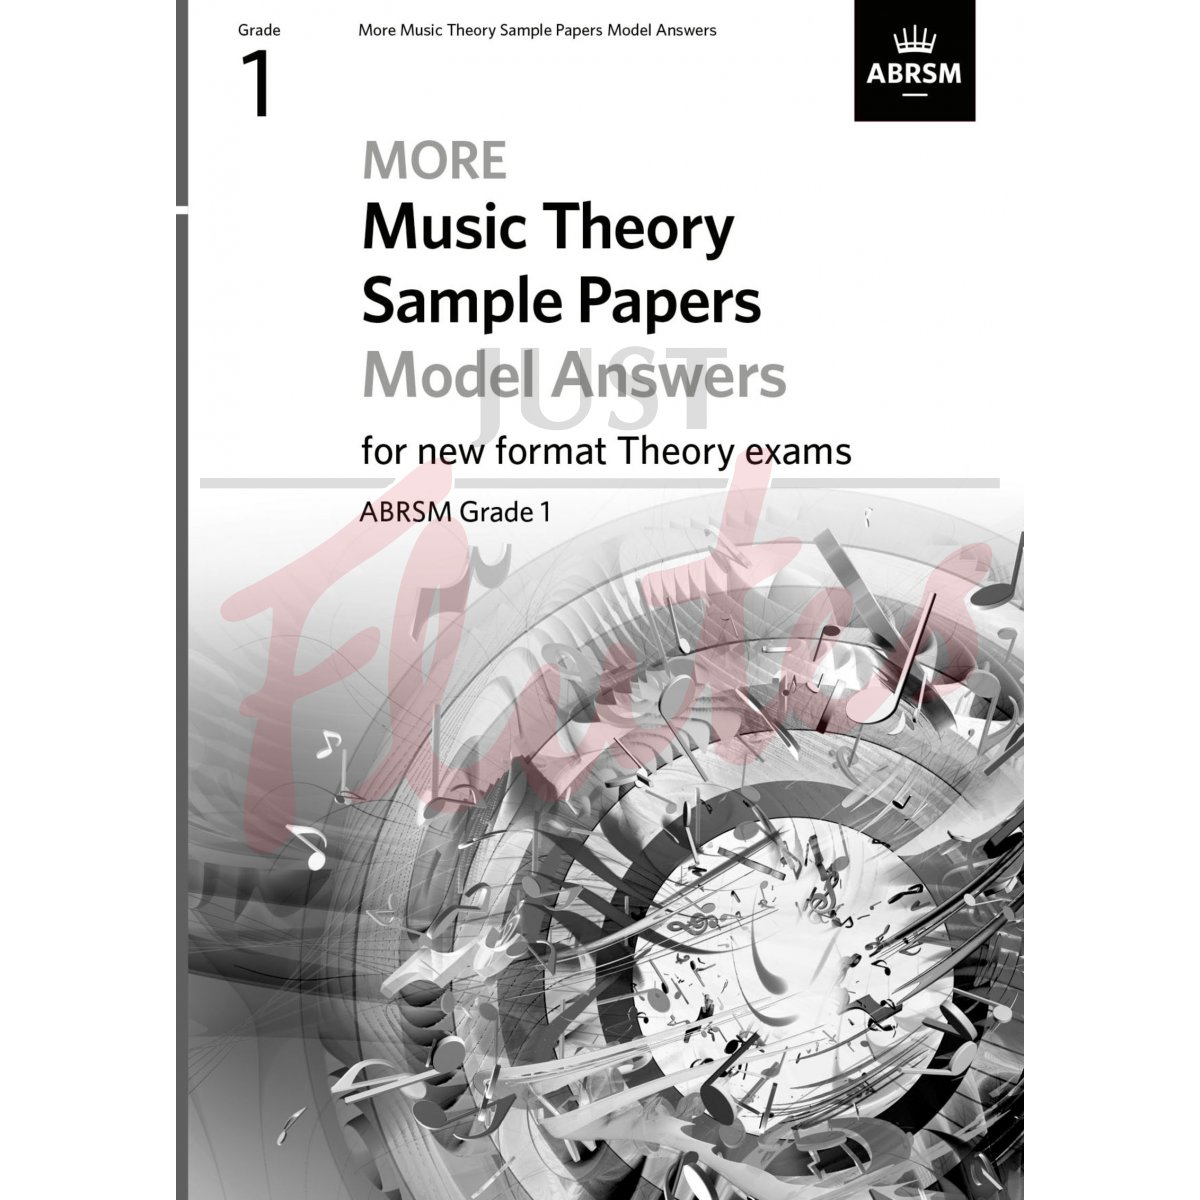 More Music Theory Sample Papers Grade 1 Model Answers